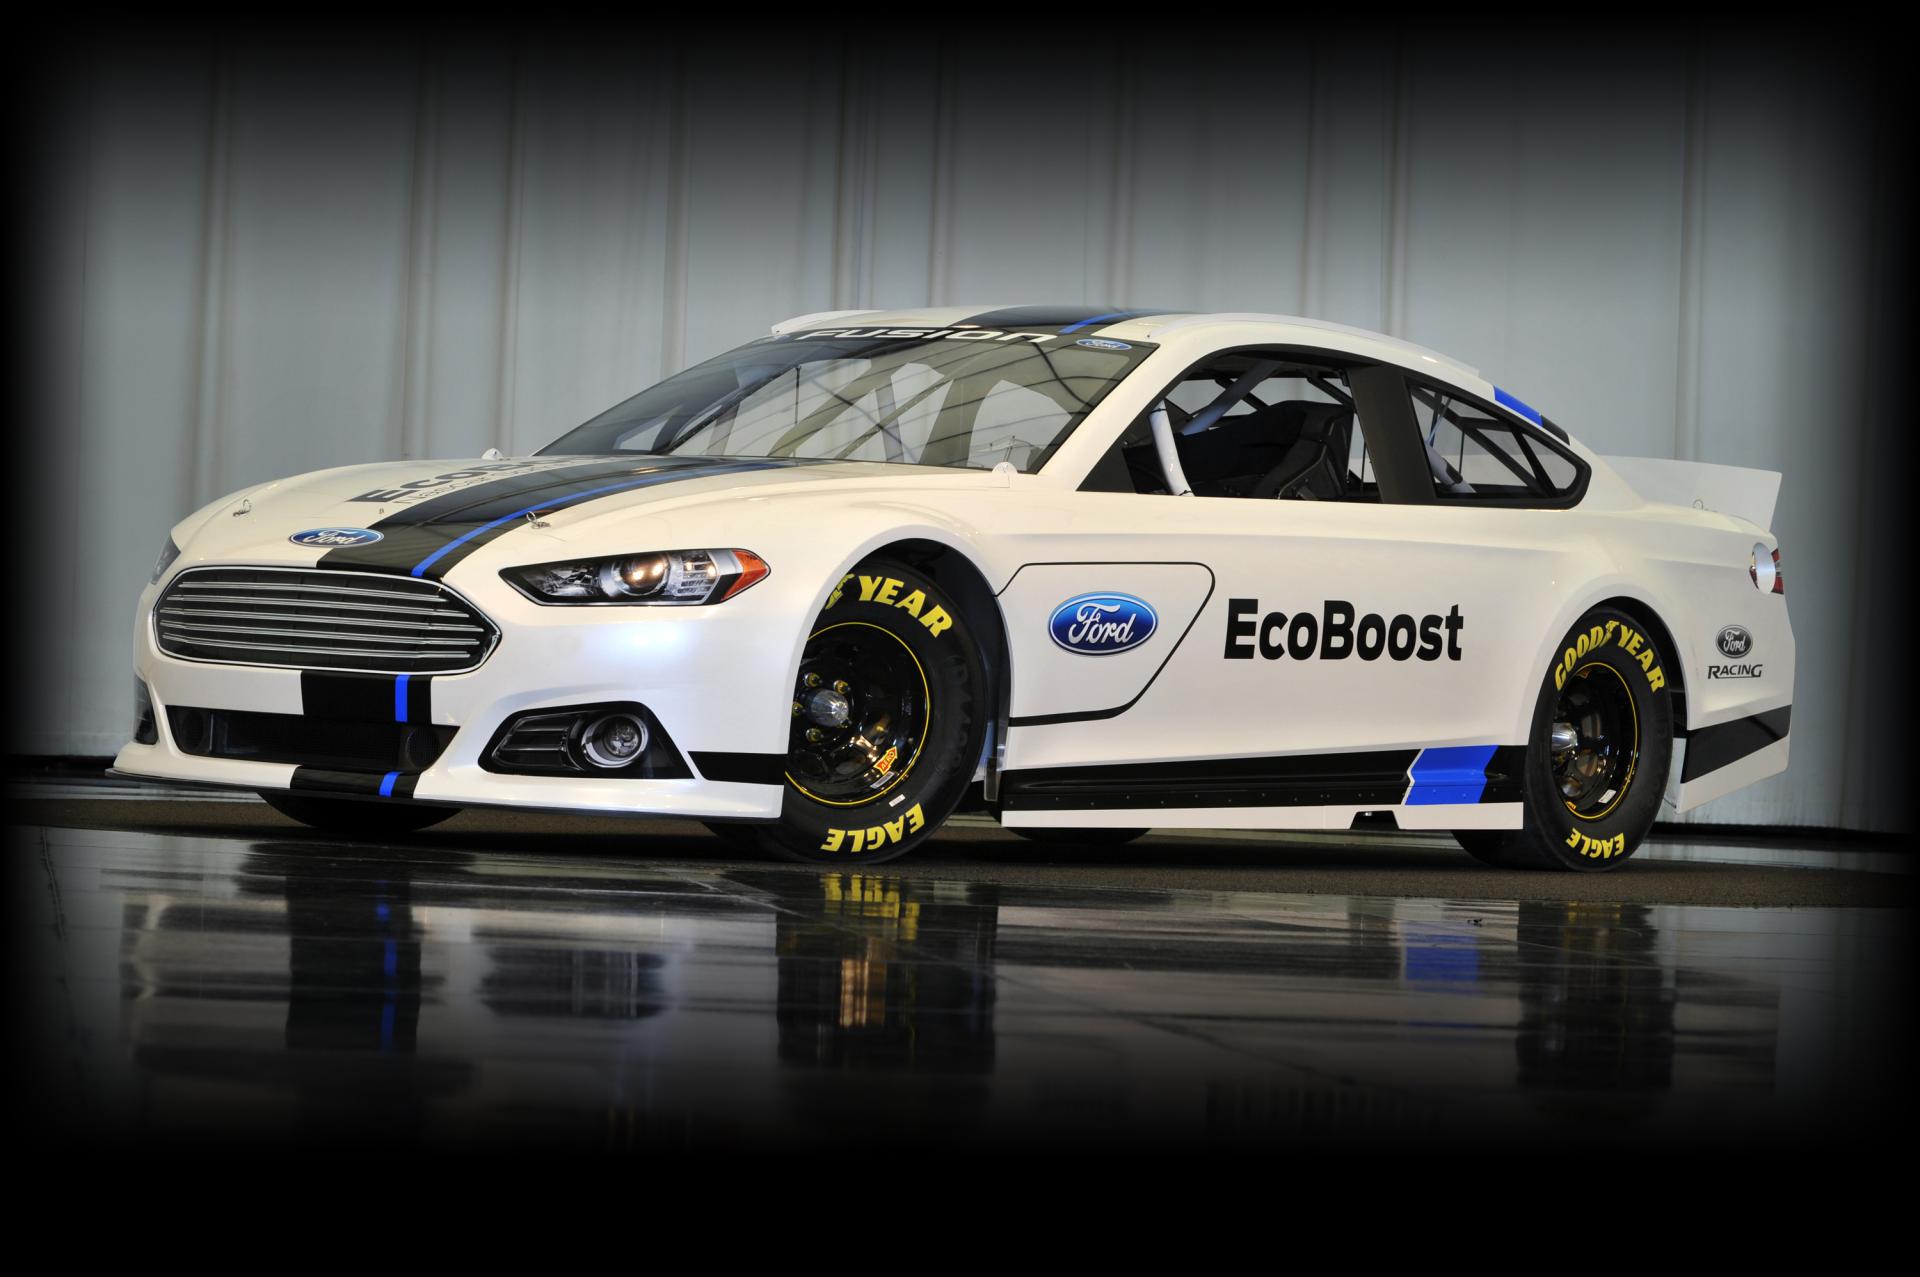 2013 Ford Fusion NASCAR Sprint Cup Pictures, News, Research, Pricing - conceptcarz.com1920 x 1277